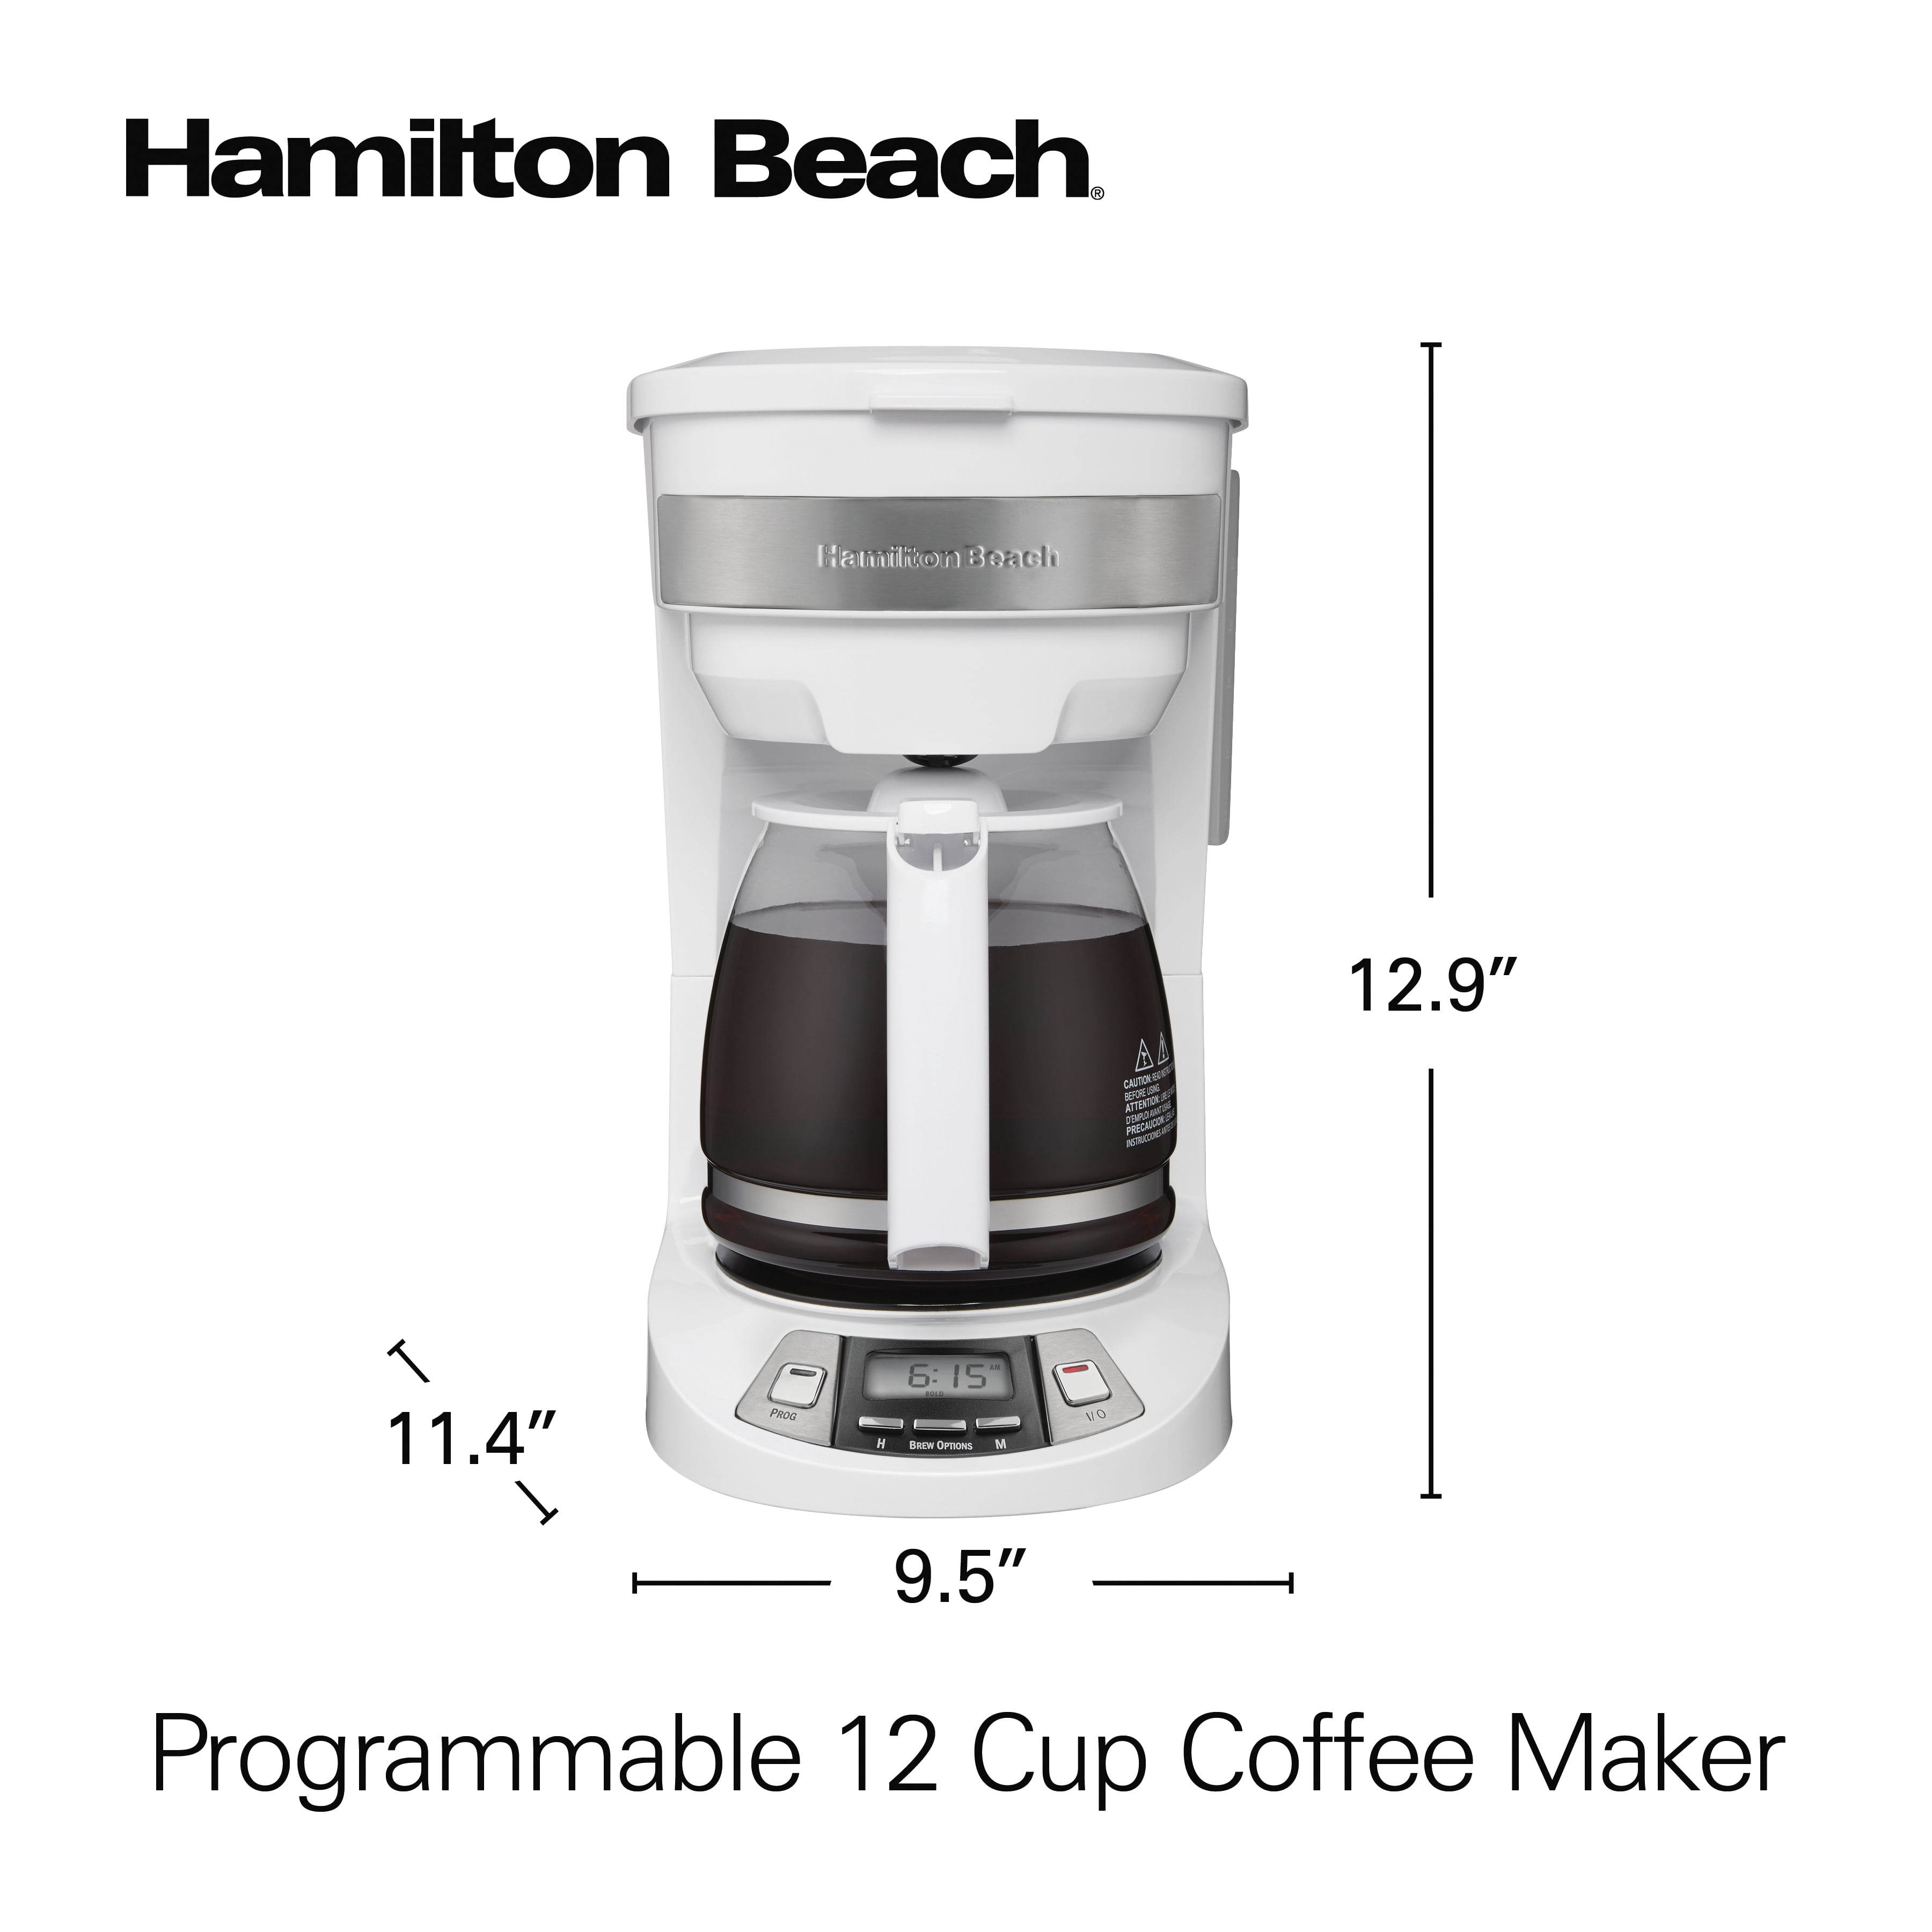 Hamilton Beach 12 Cup Programmable Coffee Maker - Black 46290 - Never Used  40094462902